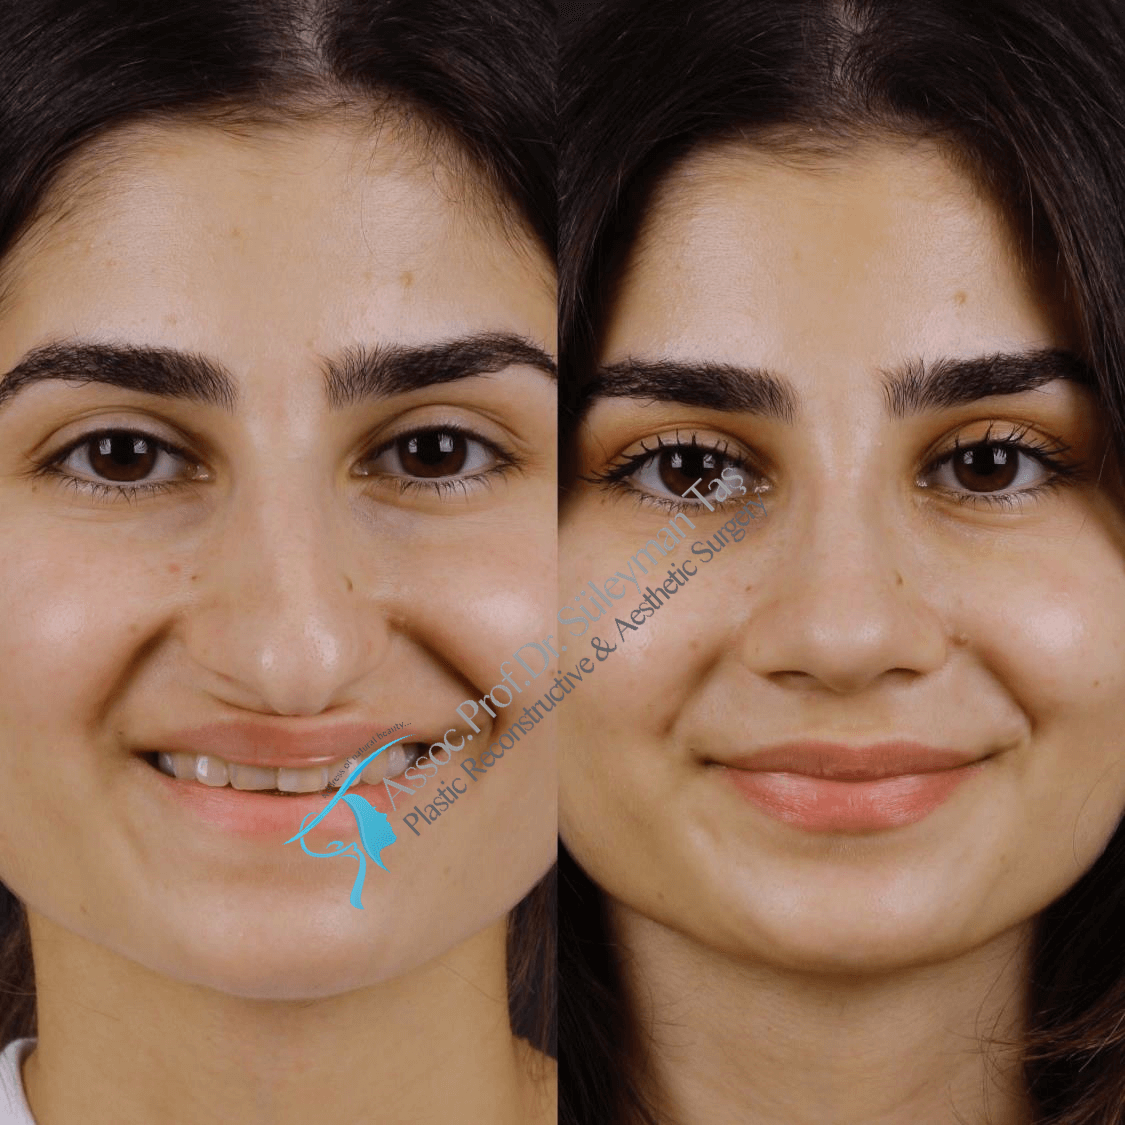 Before and after rhinoplasty female in istanbul